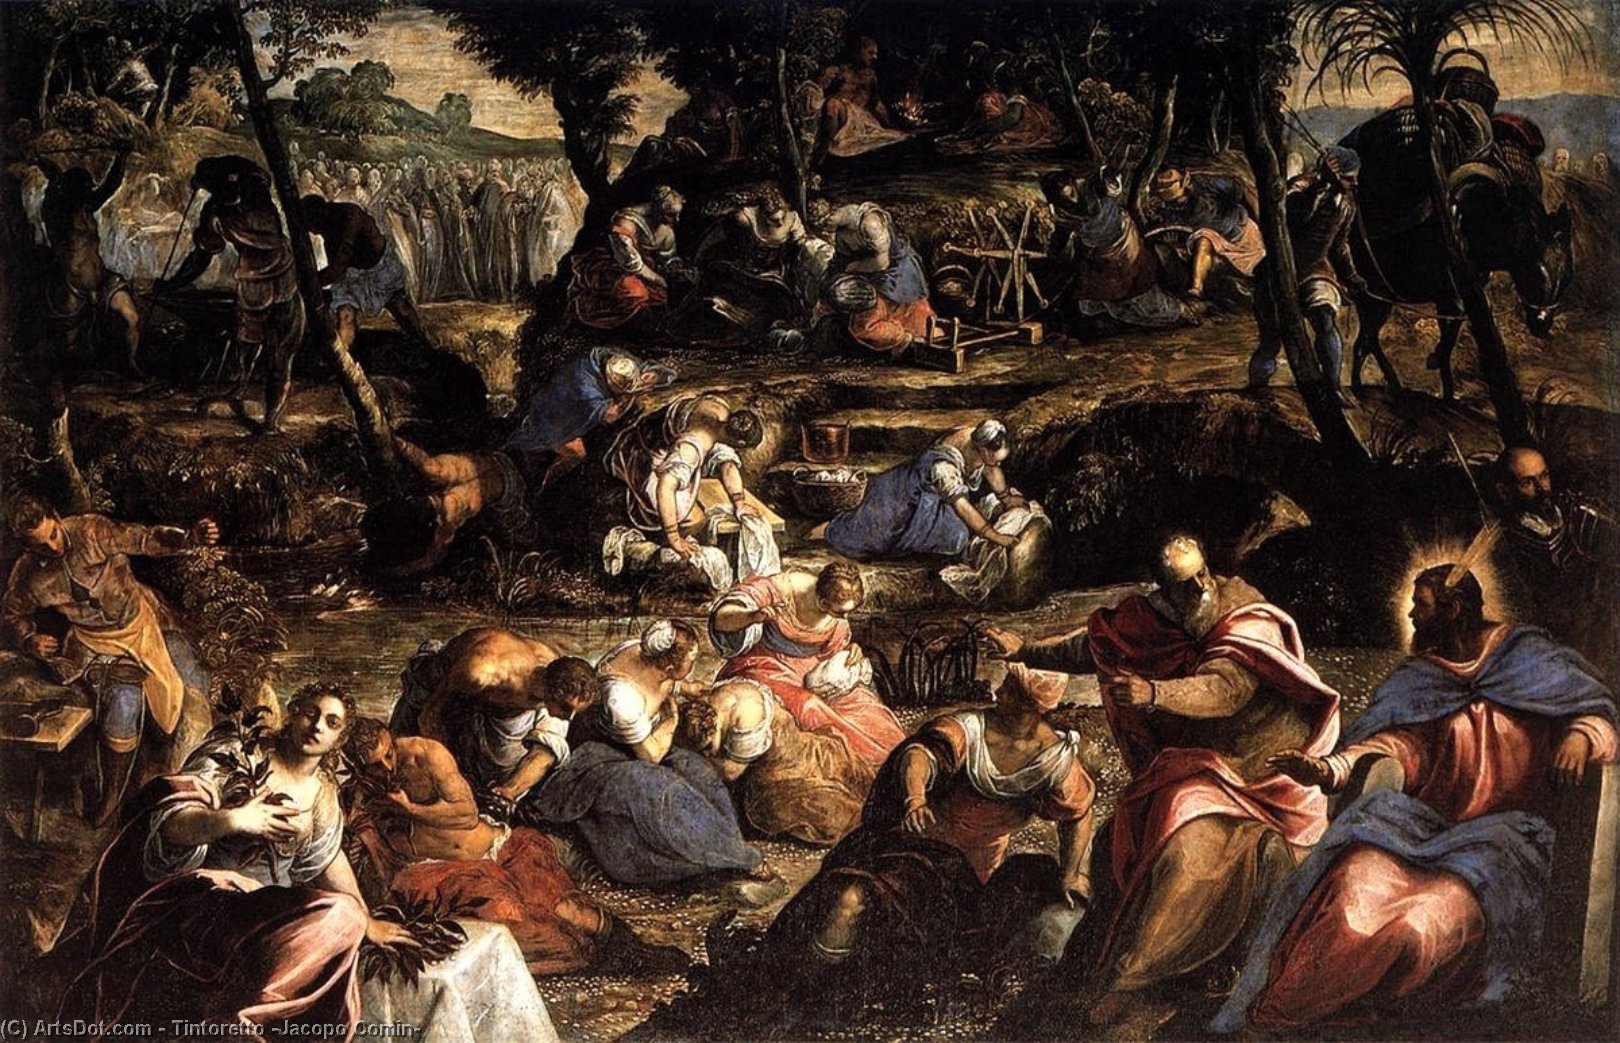 Order Paintings Reproductions The Jews in the Desert, 1593 by Tintoretto (Jacopo Comin) (1518-1594, Italy) | ArtsDot.com